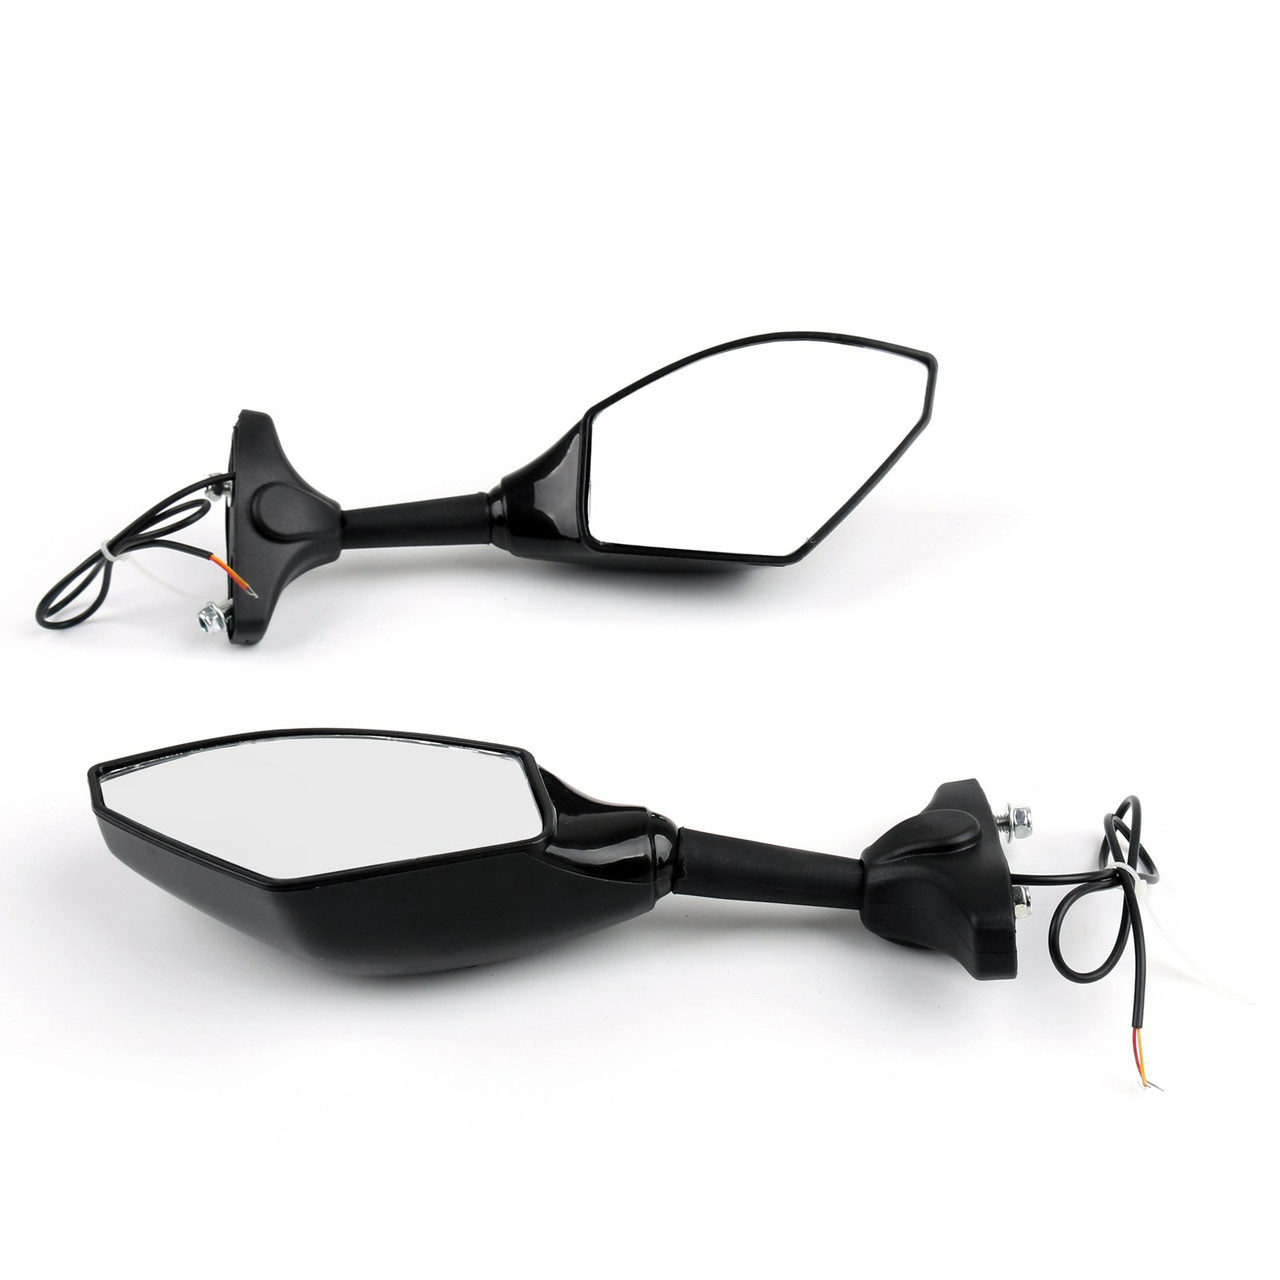 Black Rear View Side Mirrors With LED Turn Signals Fit For Triumph Daytona 675 675R 2011 TT600 00-03 Trophy 1200 91-04 Black